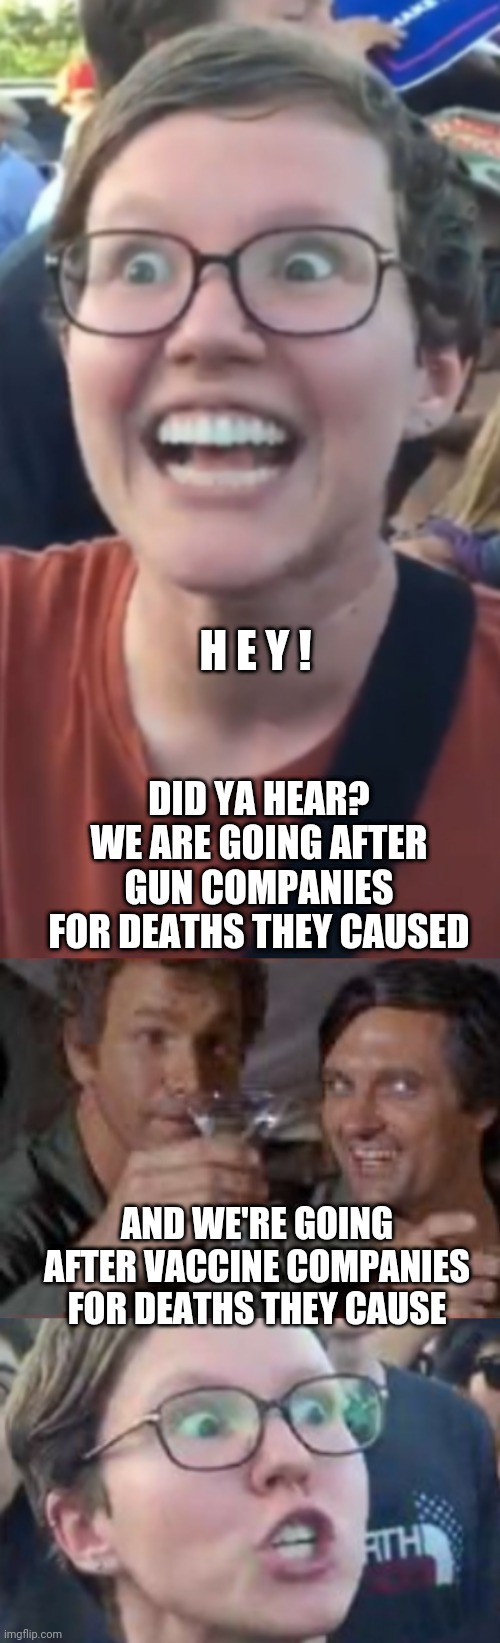 Did ya hear? | H E Y ! DID YA HEAR? WE ARE GOING AFTER GUN COMPANIES FOR DEATHS THEY CAUSED; AND WE'RE GOING AFTER VACCINE COMPANIES FOR DEATHS THEY CAUSE | image tagged in triggered,liberals,democrats,leftists,biden,nra | made w/ Imgflip meme maker